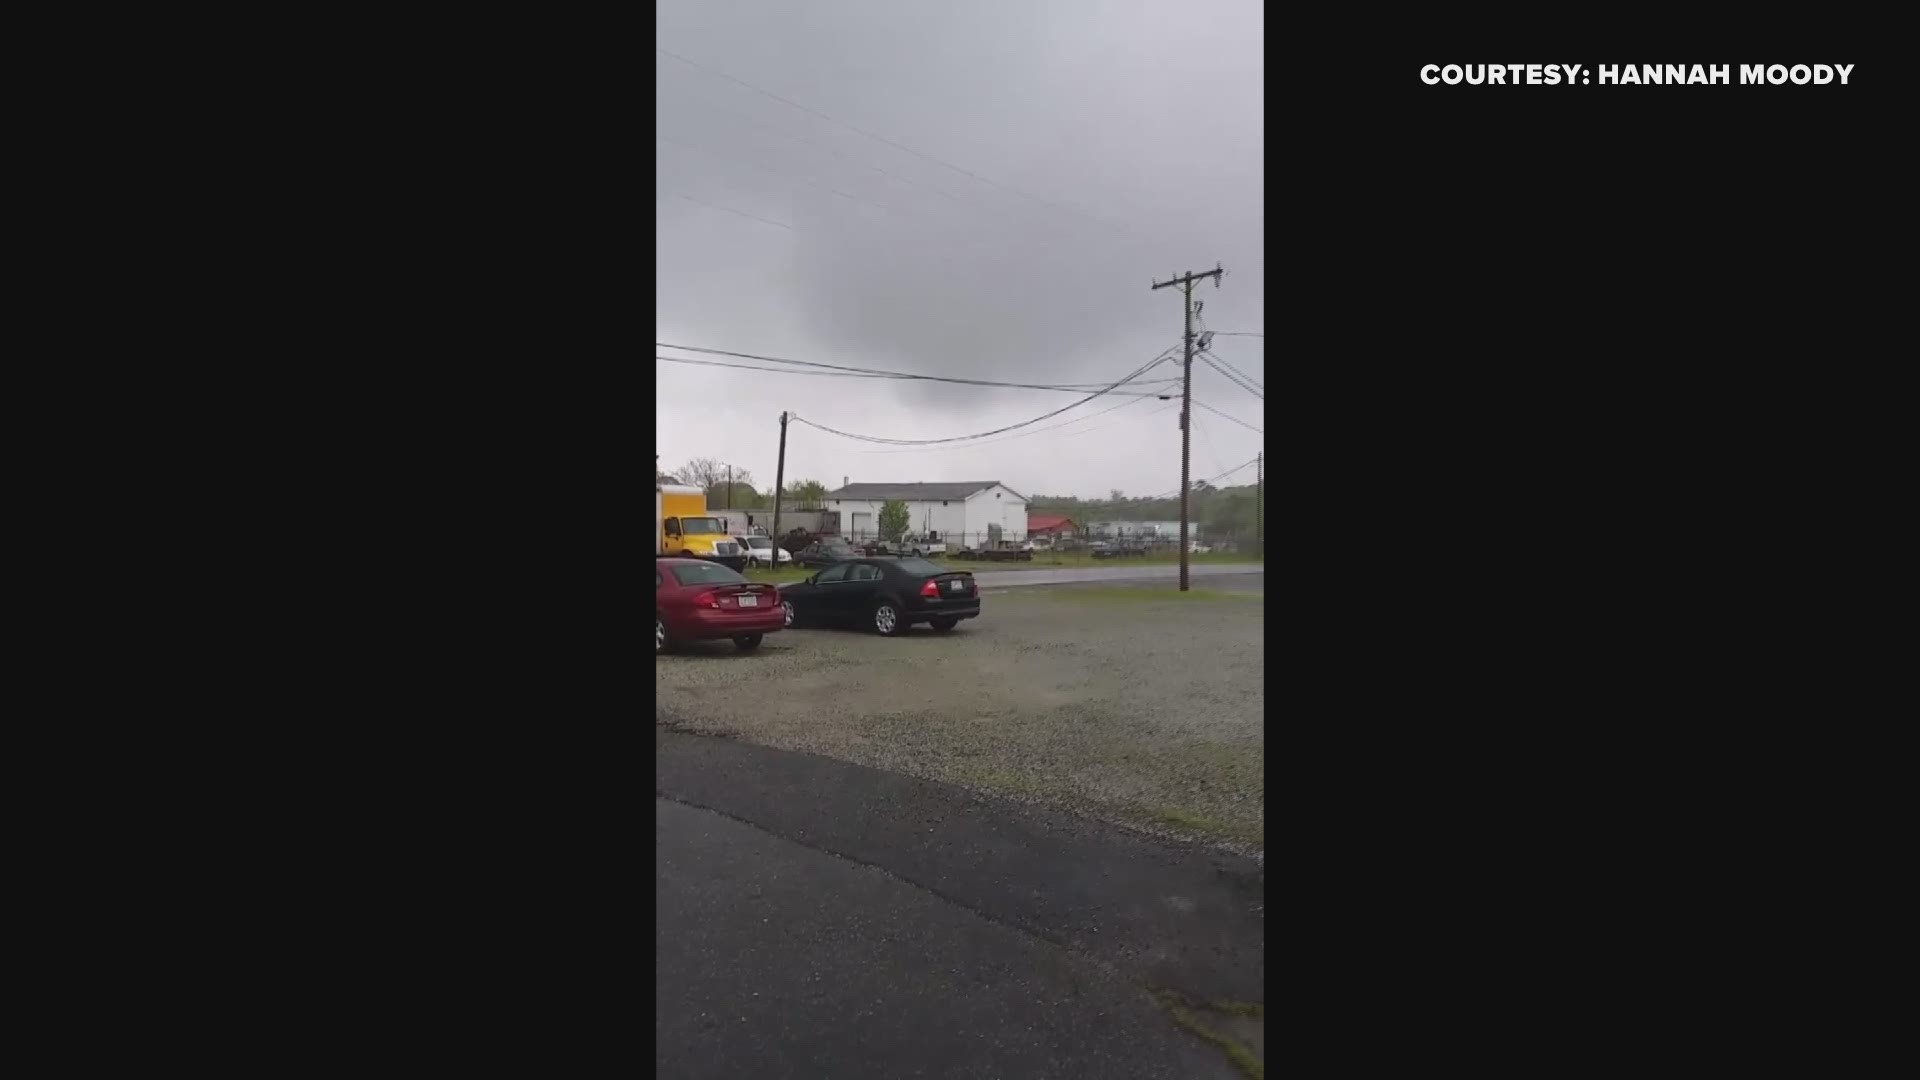 Video of an apparent funnel cloud during a tornado warned storm in Alamance County. This was at the corner of North Church Street and Hollar Drive in Haw River. Courtesy: Hannah Moody